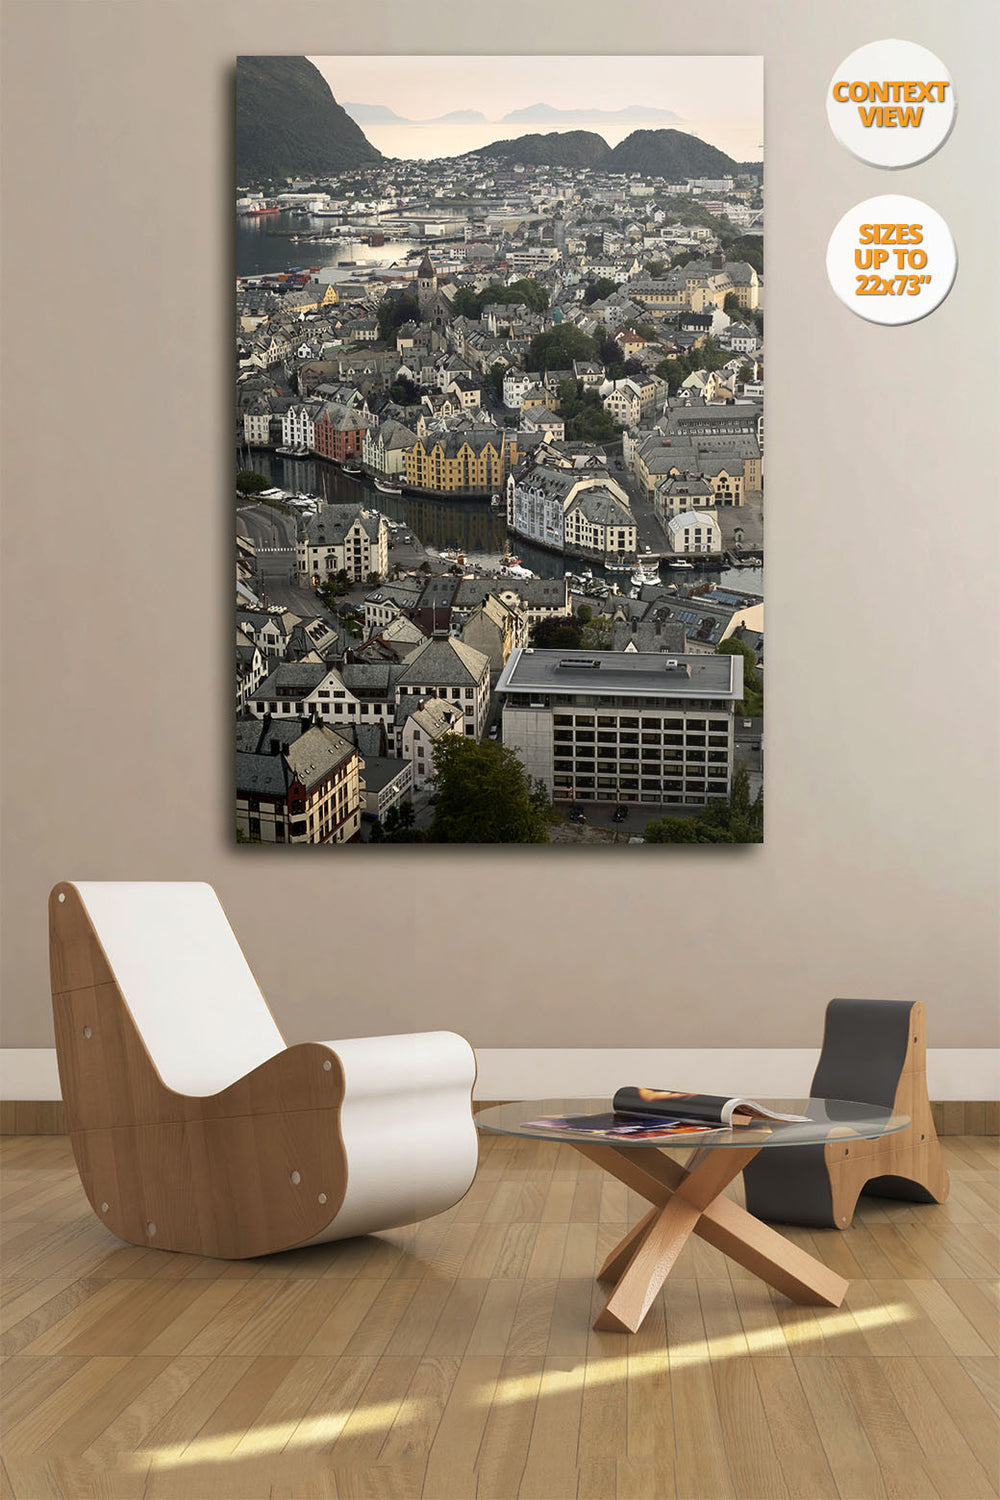 Aerial view of Alseund, Sunnmore Fiord Region, Norway. | Hanged in a living room.